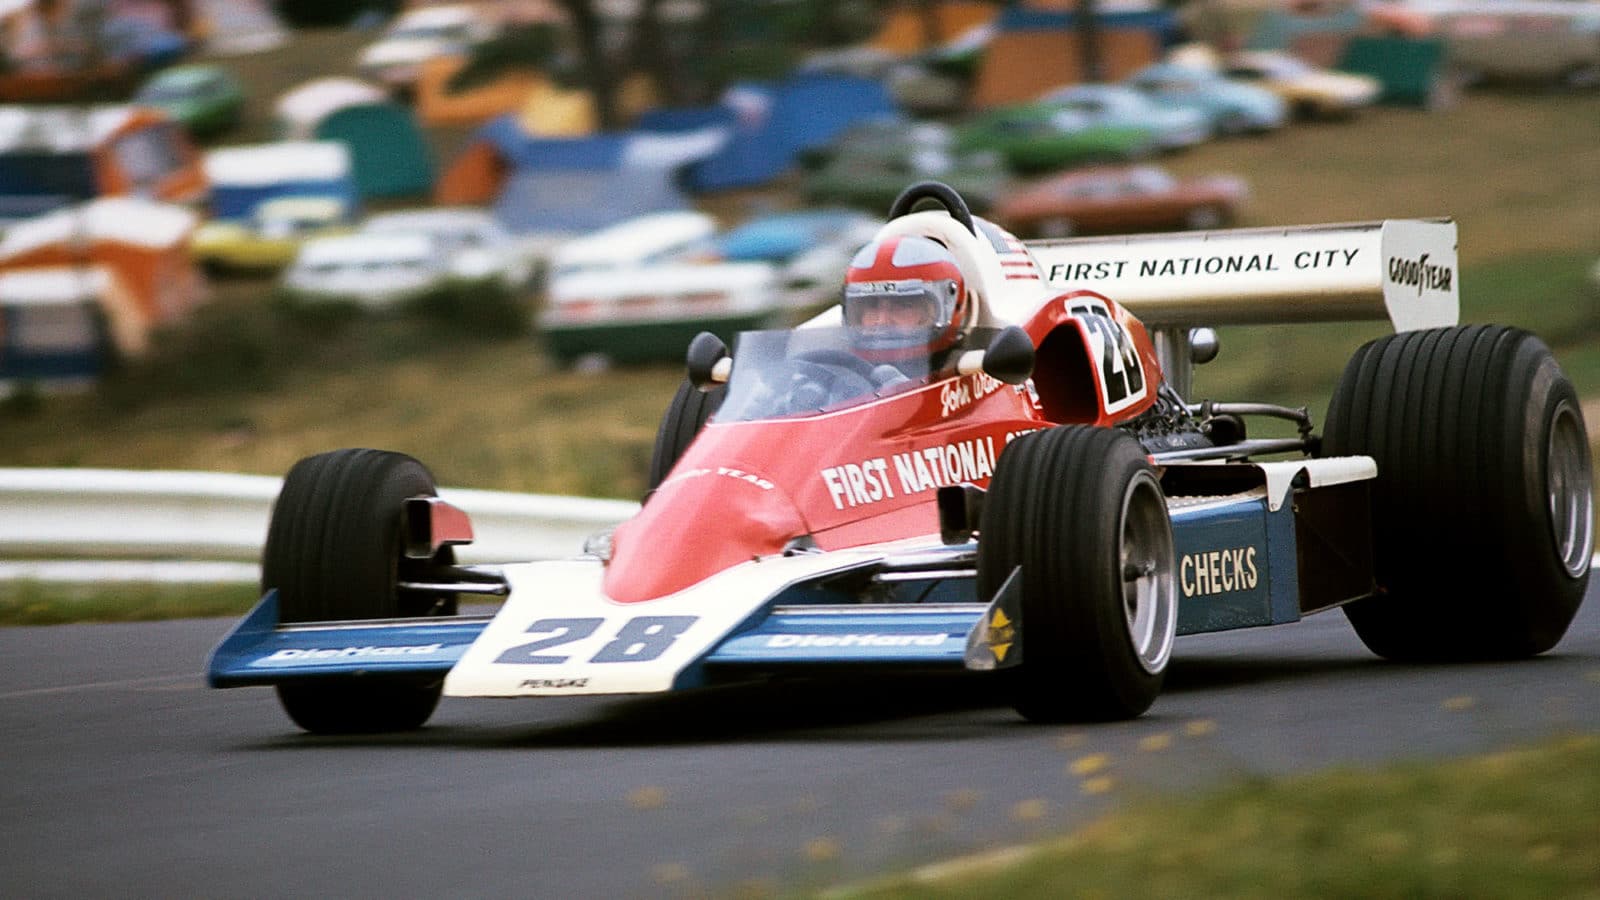 John Watson, Penske-Ford PC4, Grand Prix of Austria, Osterreichring, 15 August 1976. John Watson driving the Penske-Ford PC4 on his way to victory in the 1976 Austrian Grand Prix. (Photo by Paul-Henri Cahier /Getty Images)